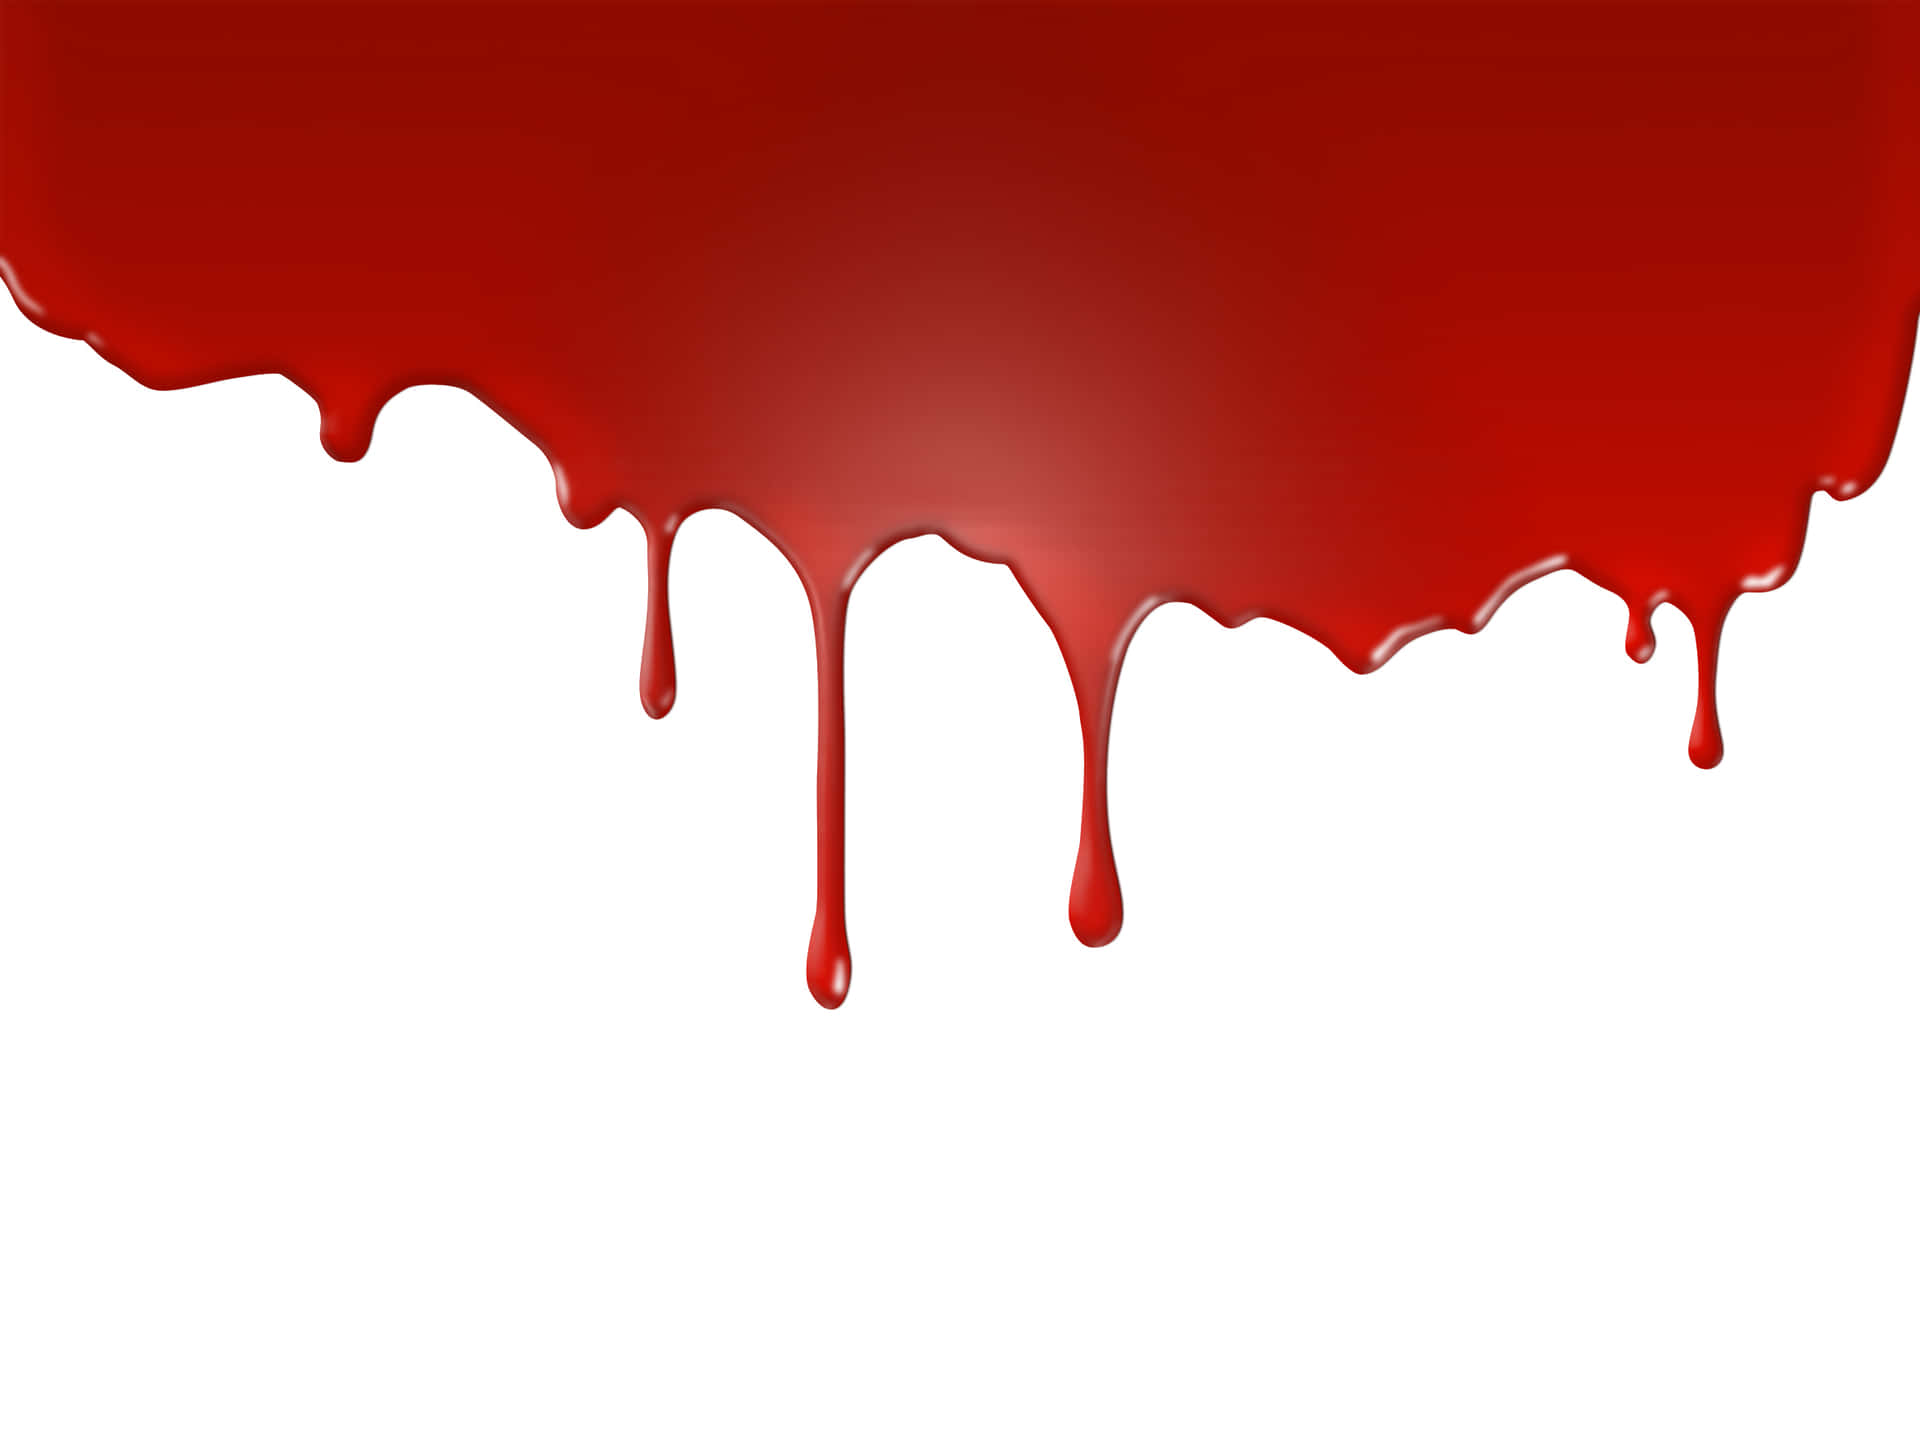 A red liquid is dripping down - Blood